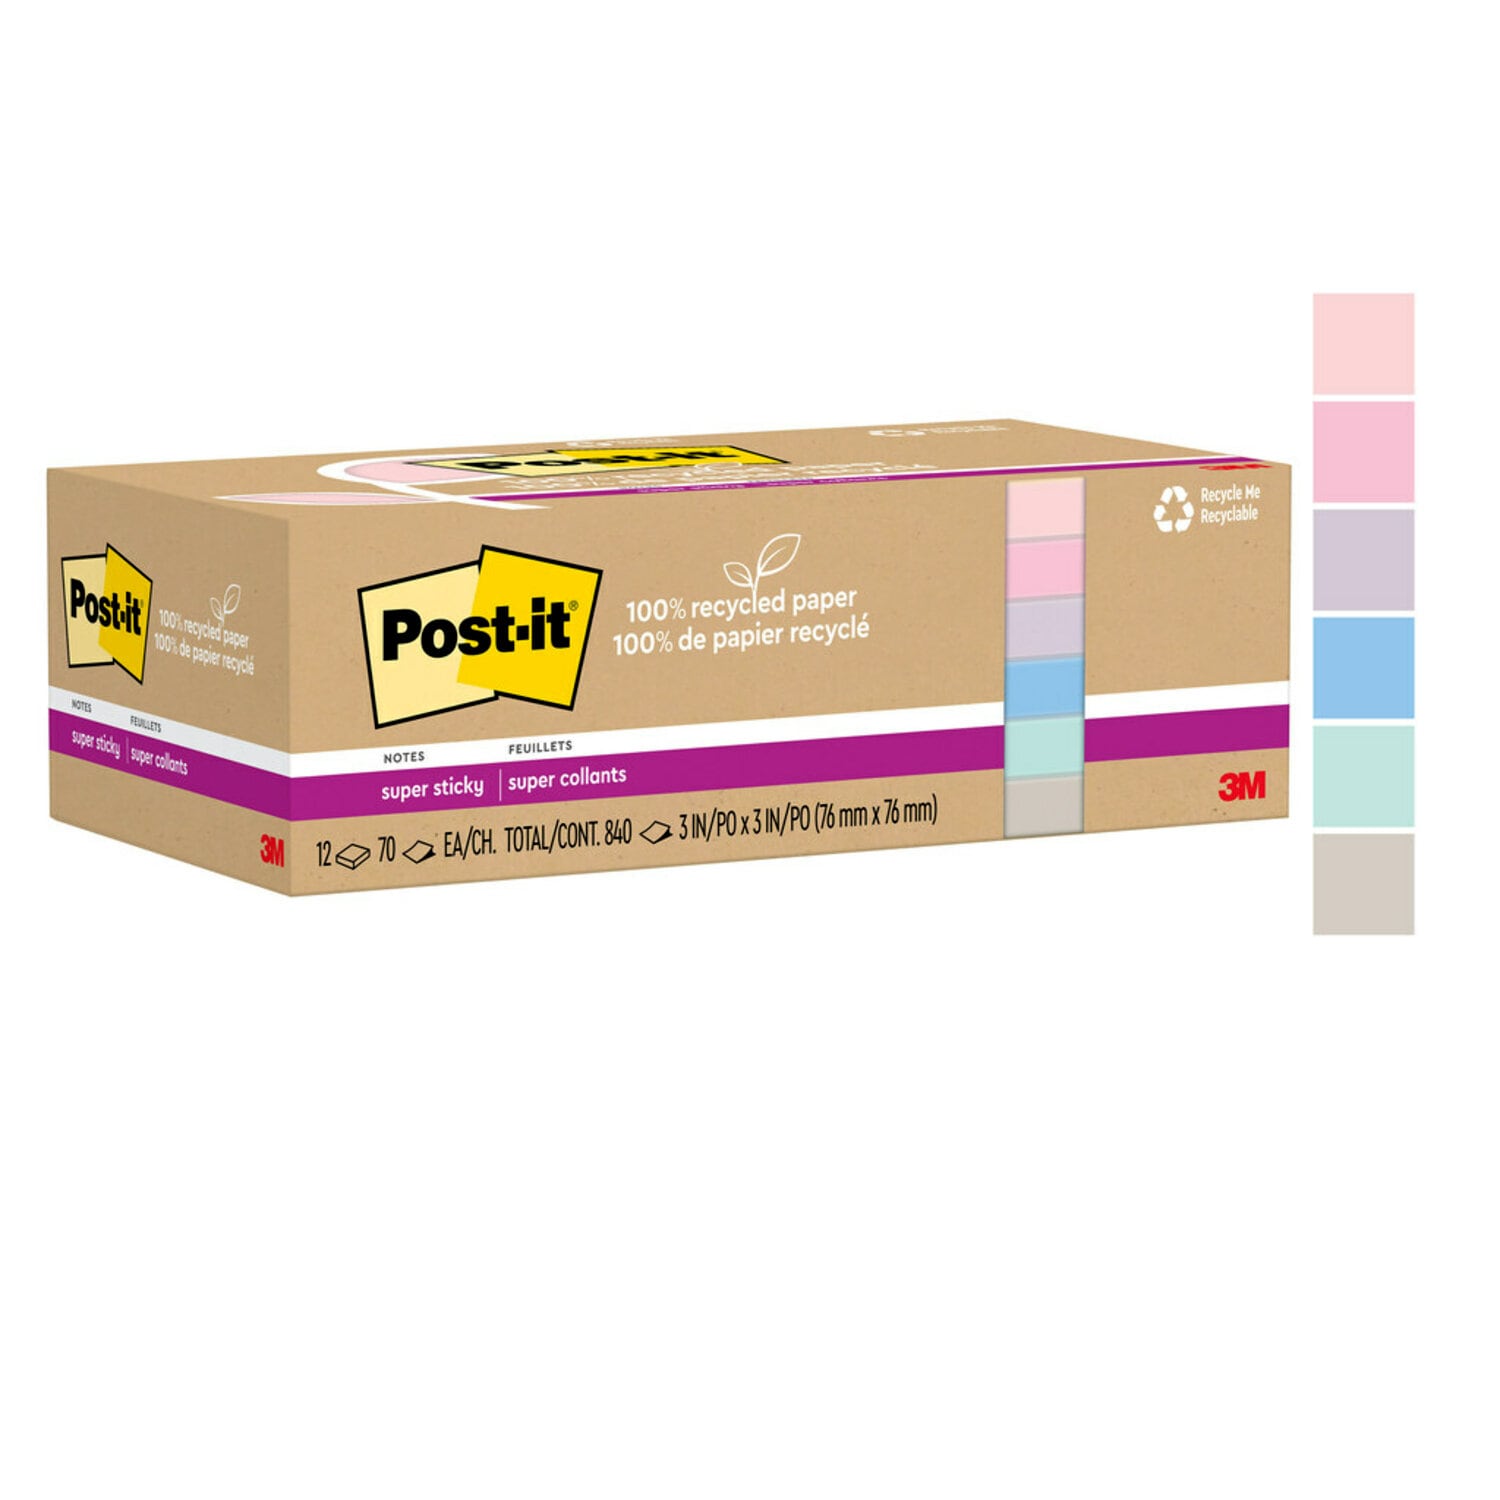 7100290397 - Post-it Super Sticky Recycled Notes 654R-12SSNRP, 3 in x 3 in (76 mm x 76 mm)